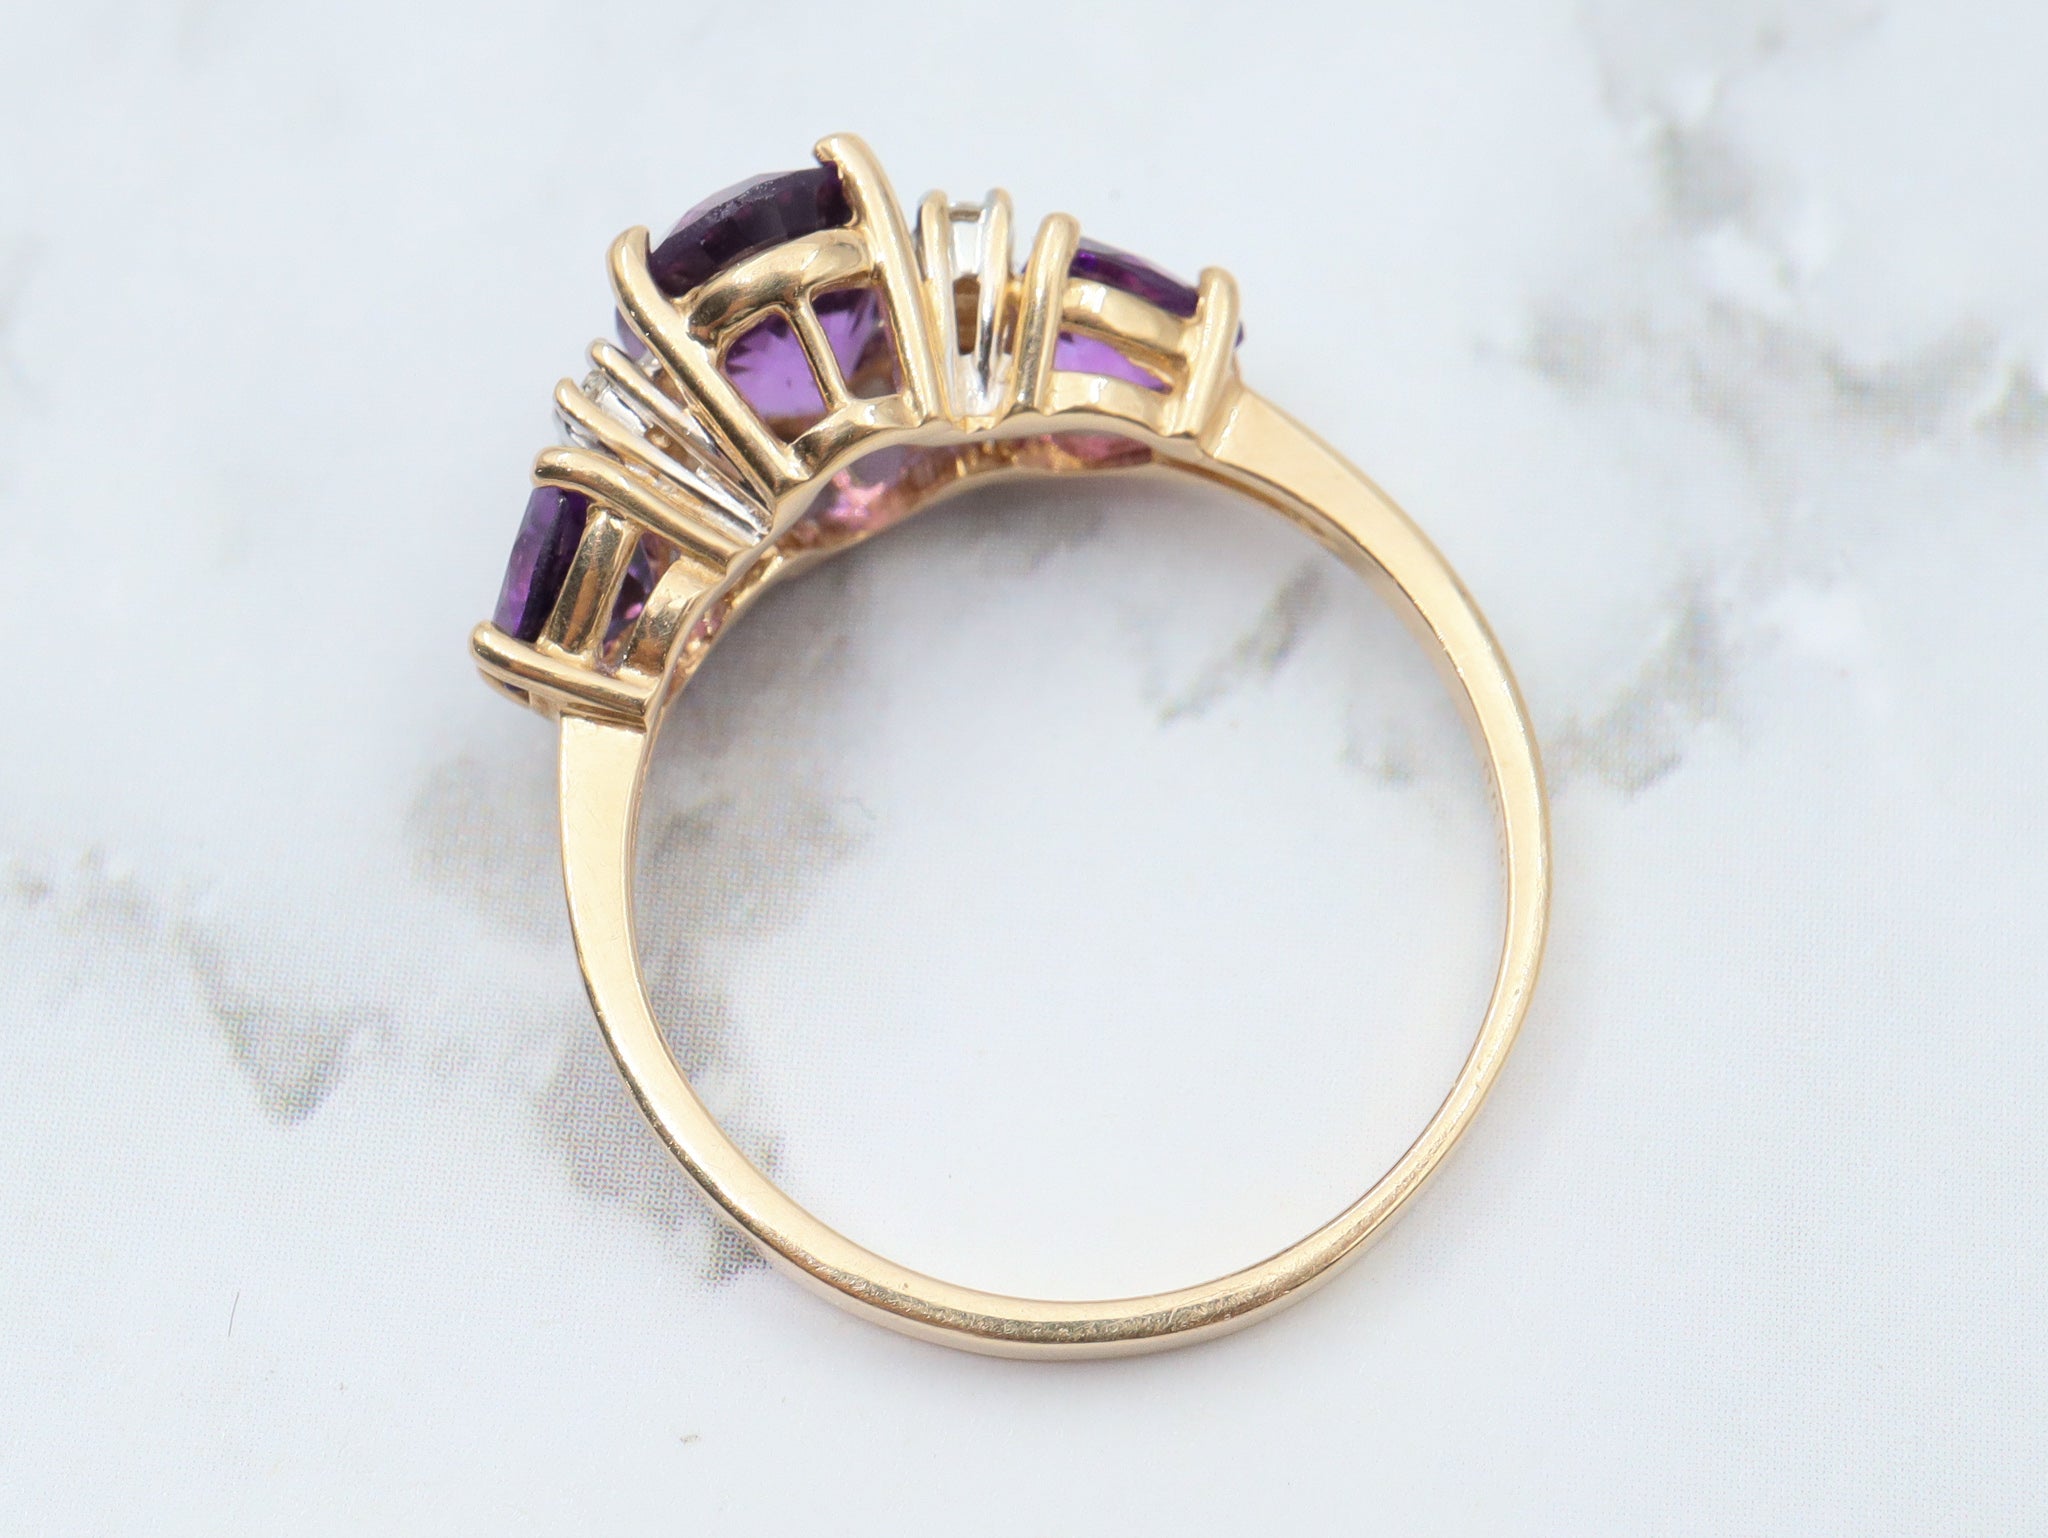 Vintage 14k gold amethyst and diamond cocktail ring size 7